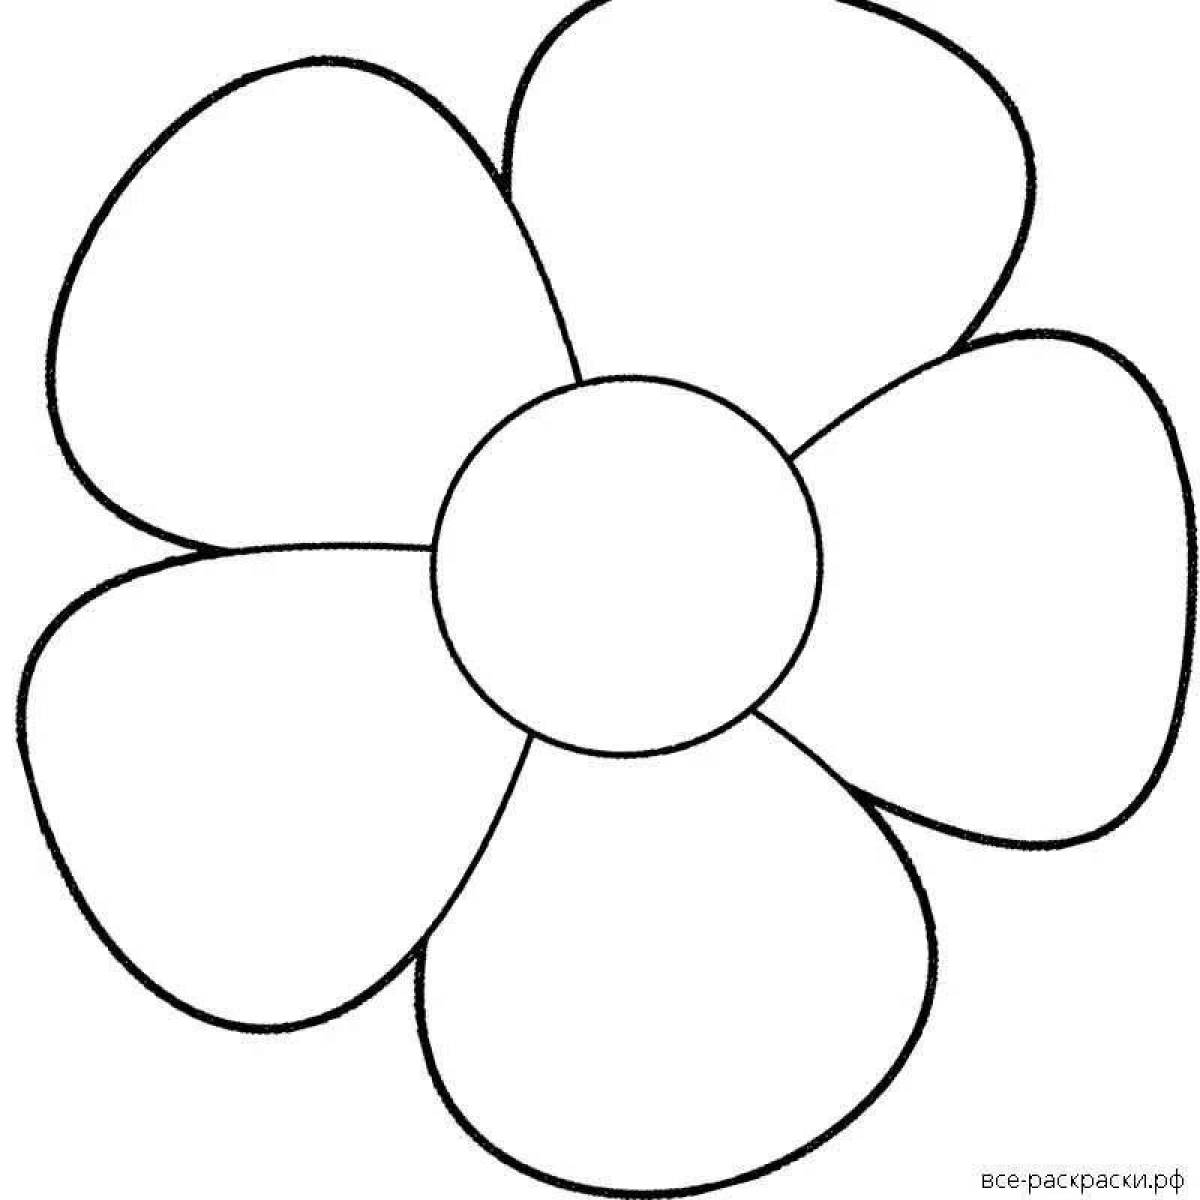 Outstanding daisy coloring page